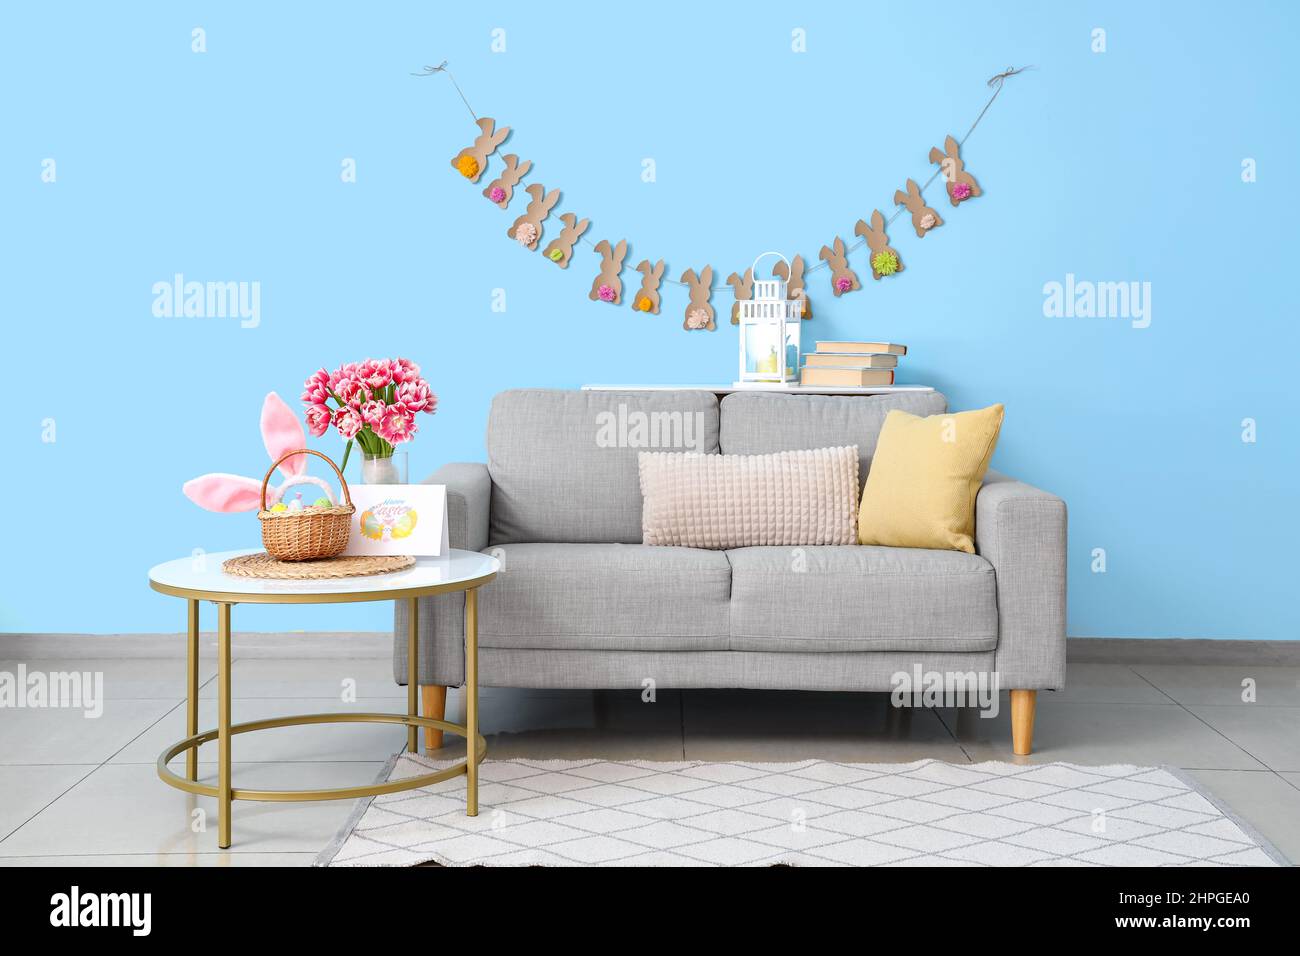 Interior of stylish living room with tulips in vase and Easter decor Stock Photo